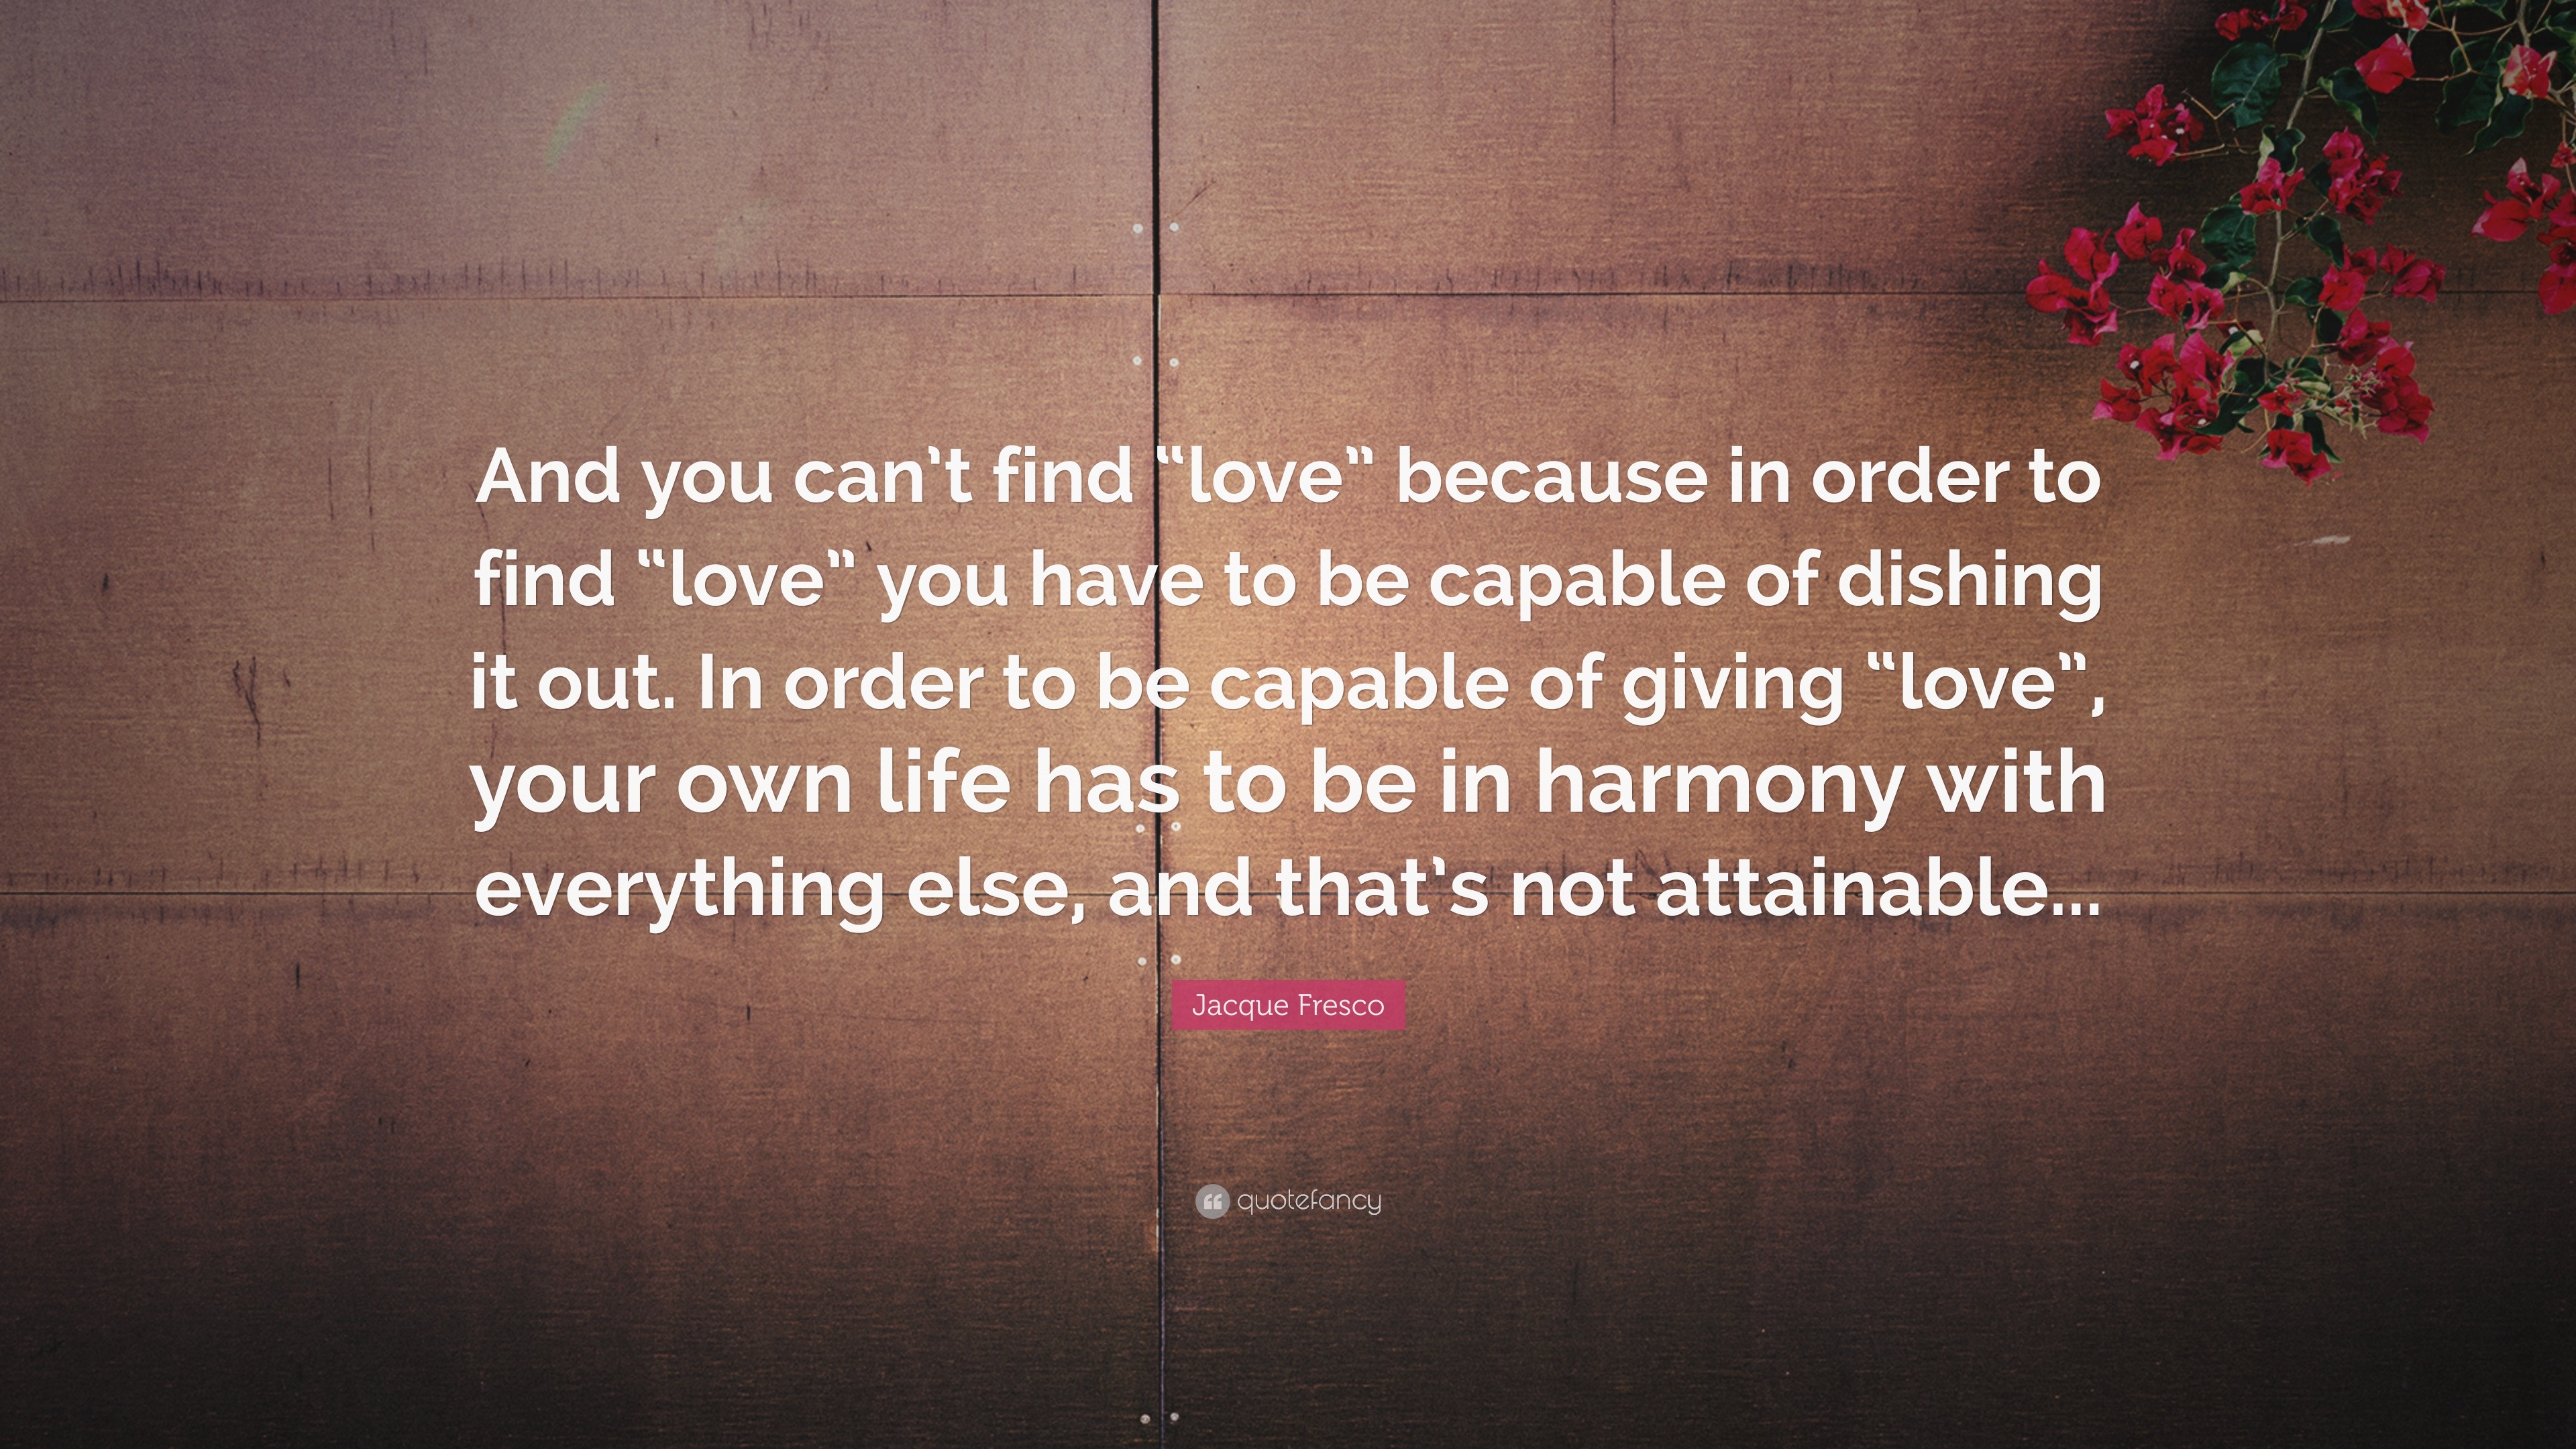 Jacque Fresco Quote: “And you can’t find “love” because in order to ...